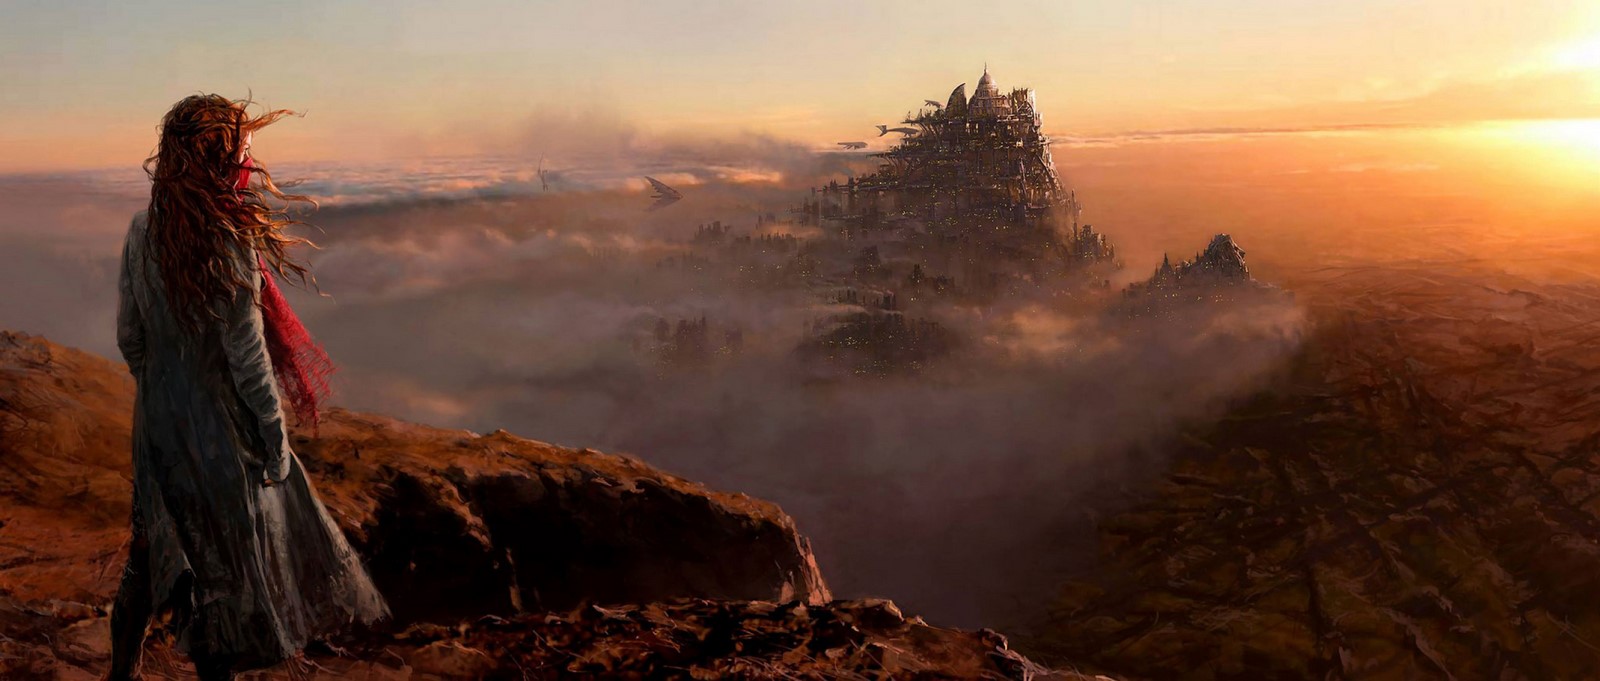 An Architectural review of The Moving Cities of Mortal Engines - Sheet1